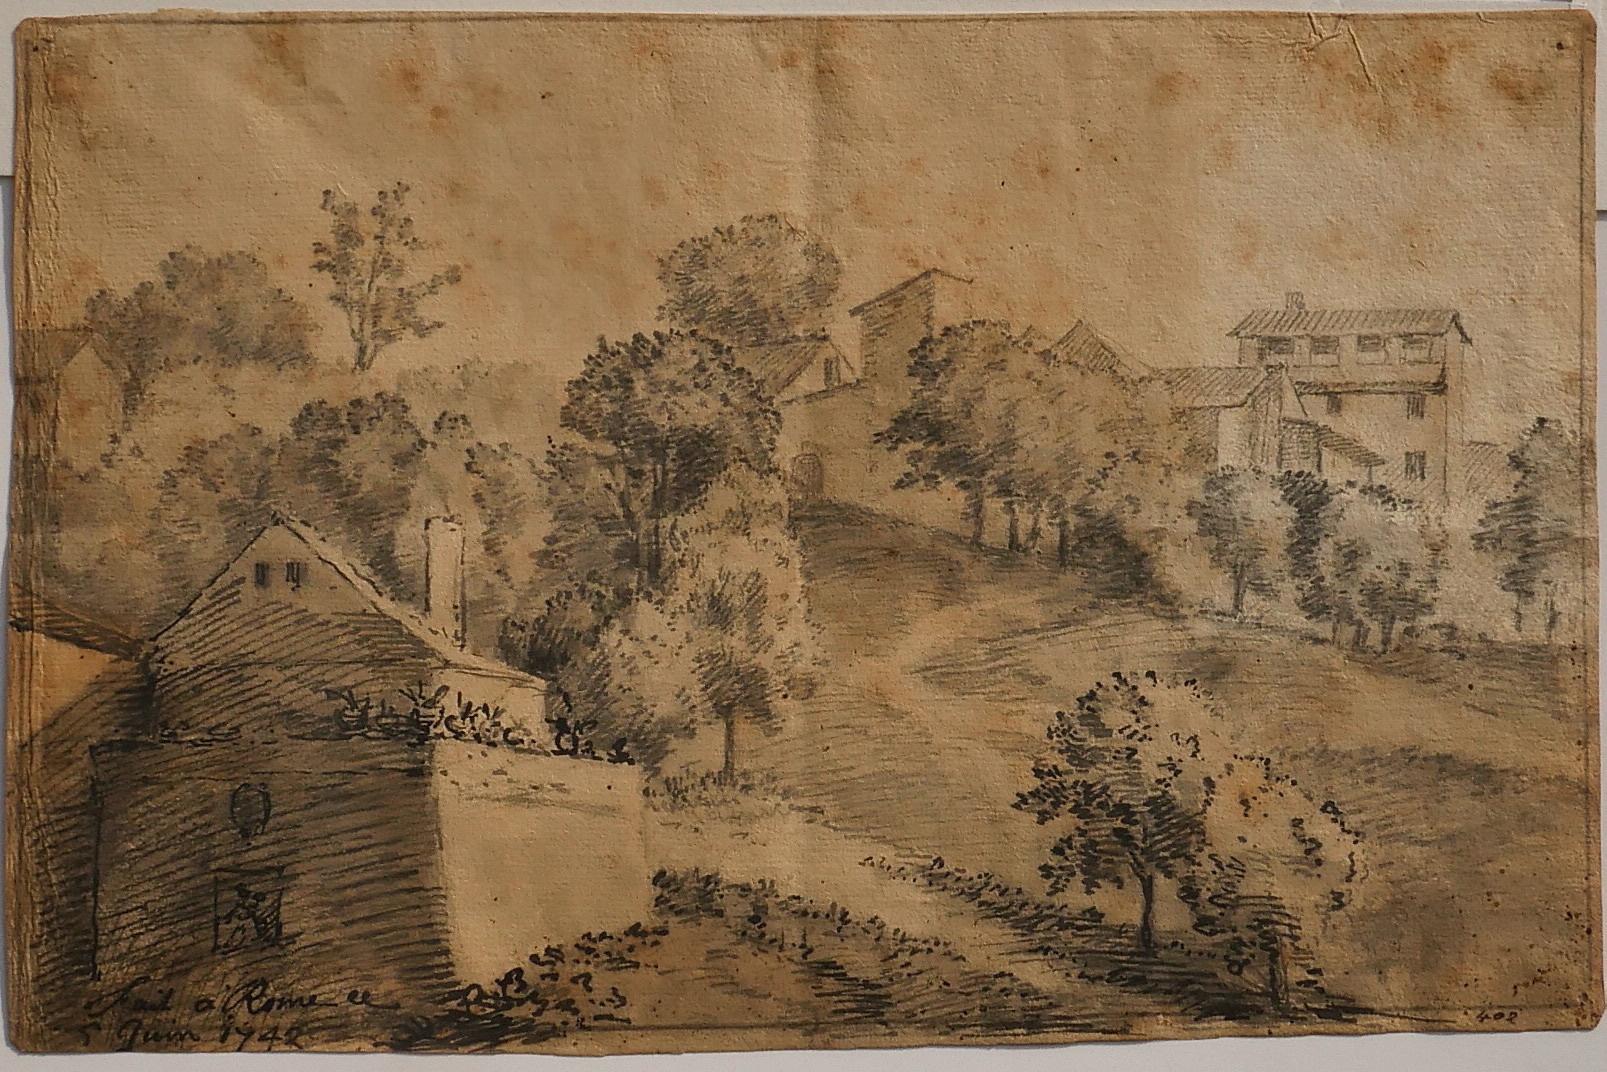 Rome, The Countryside - China Ink Drawing by Jan Pieter Verdussen - 1742